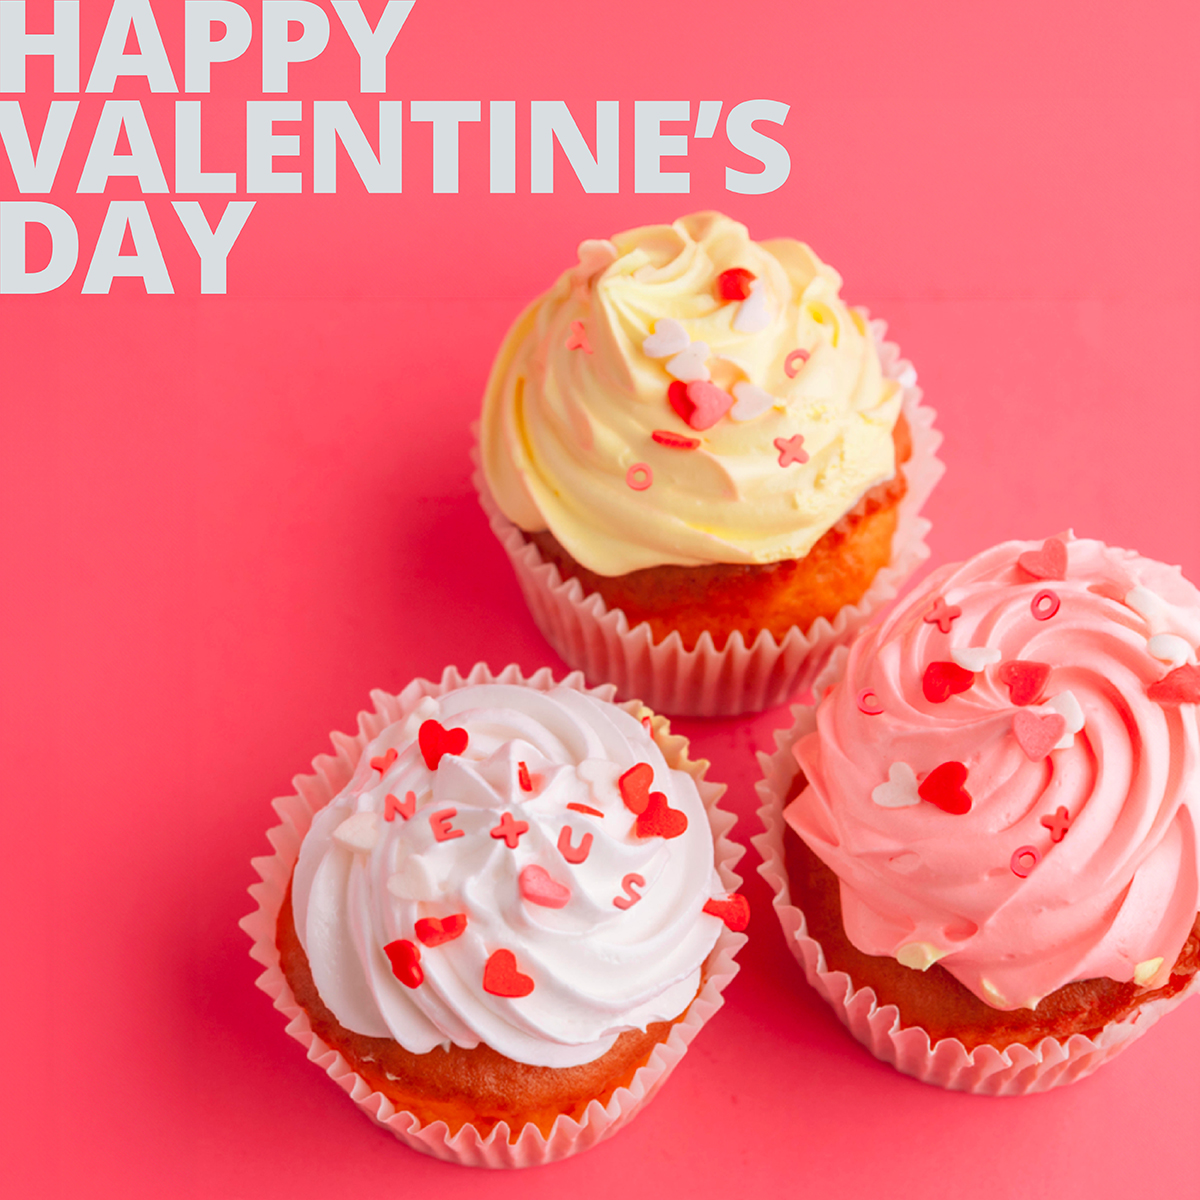 It’s time to say something sweet! Happy Valentines Day. #valentinesday #happyvalentinesday